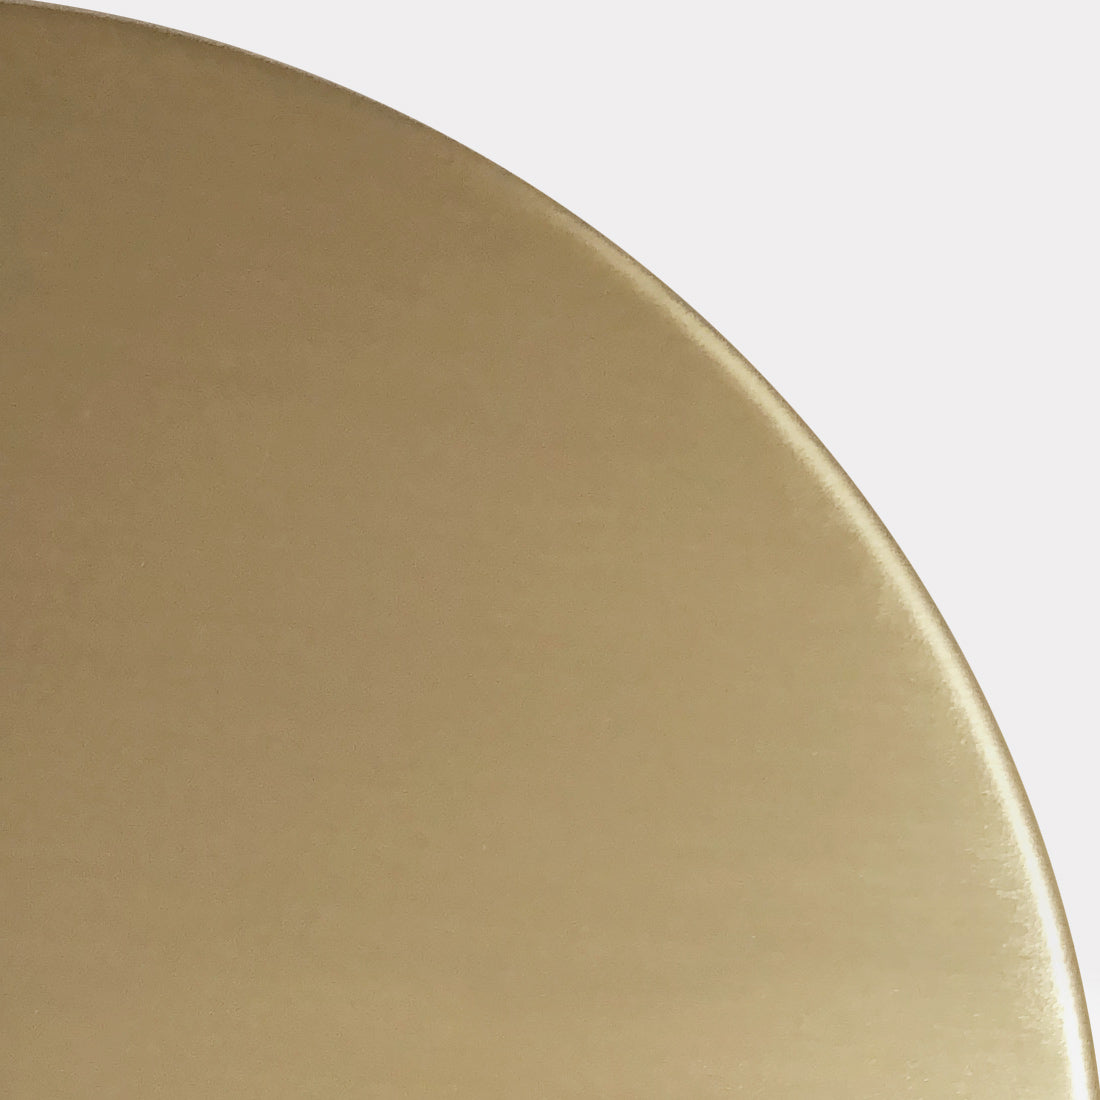 Brushed Brass Finish Swatch [ADS1013] from Abode